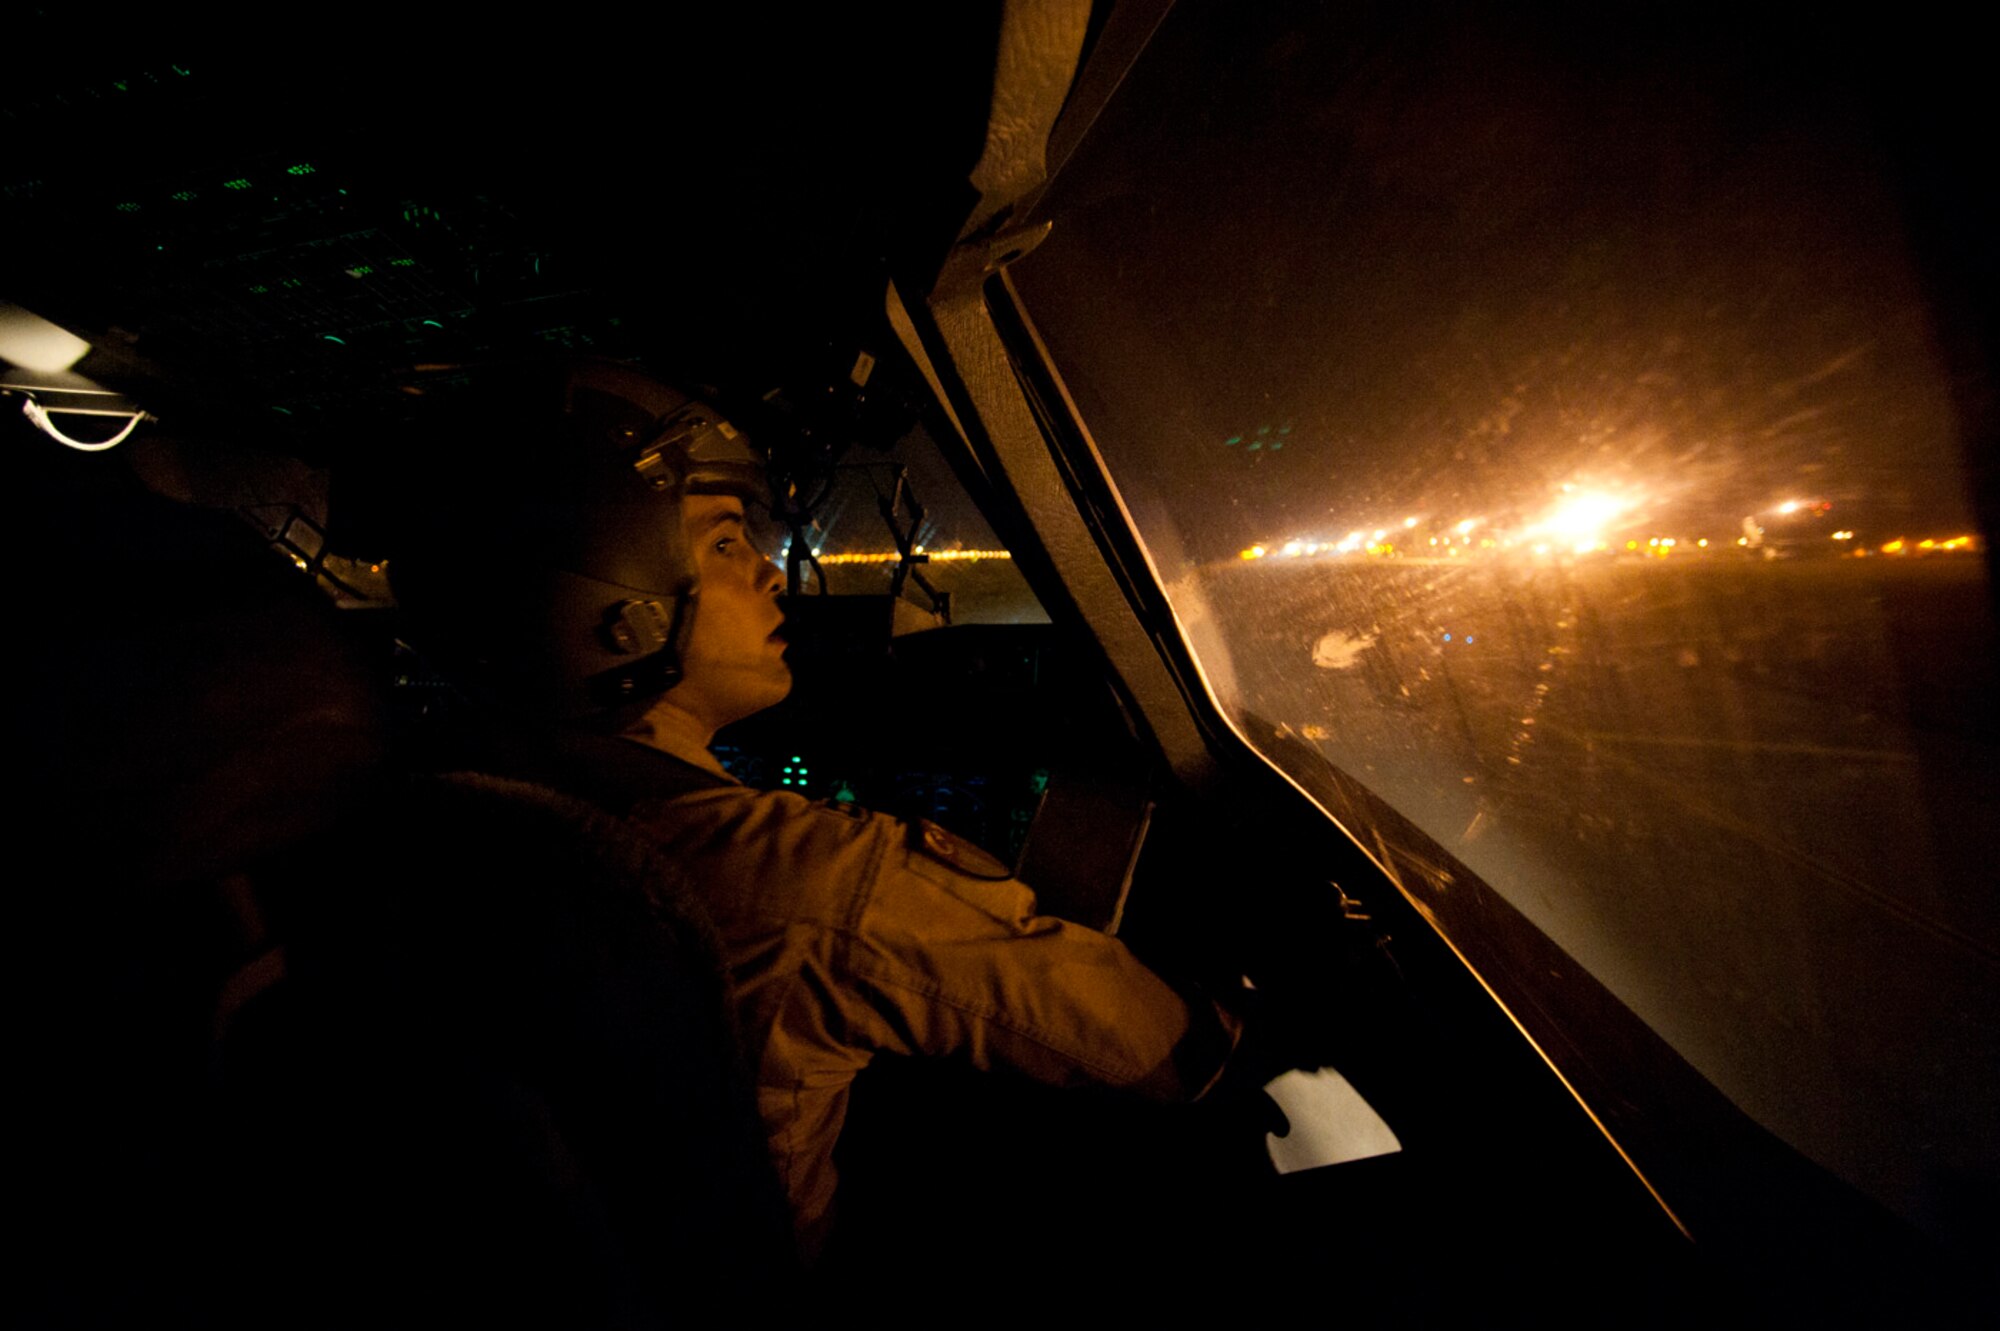 Capt. Eric Bowers, an 817th Expeditionary Airlift Squadron pilot, opens his window to clear condensation after landing a C-17 Globemaster III aircraft Aug. 18, 2011, at Incirlik Air Base, Turkey. The crew transported equipment and supplies from Incirlik to Kandahar Air Field, Afghanistan. (U.S. Air Force photo by Tech. Sgt. Michael B. Keller/Released)